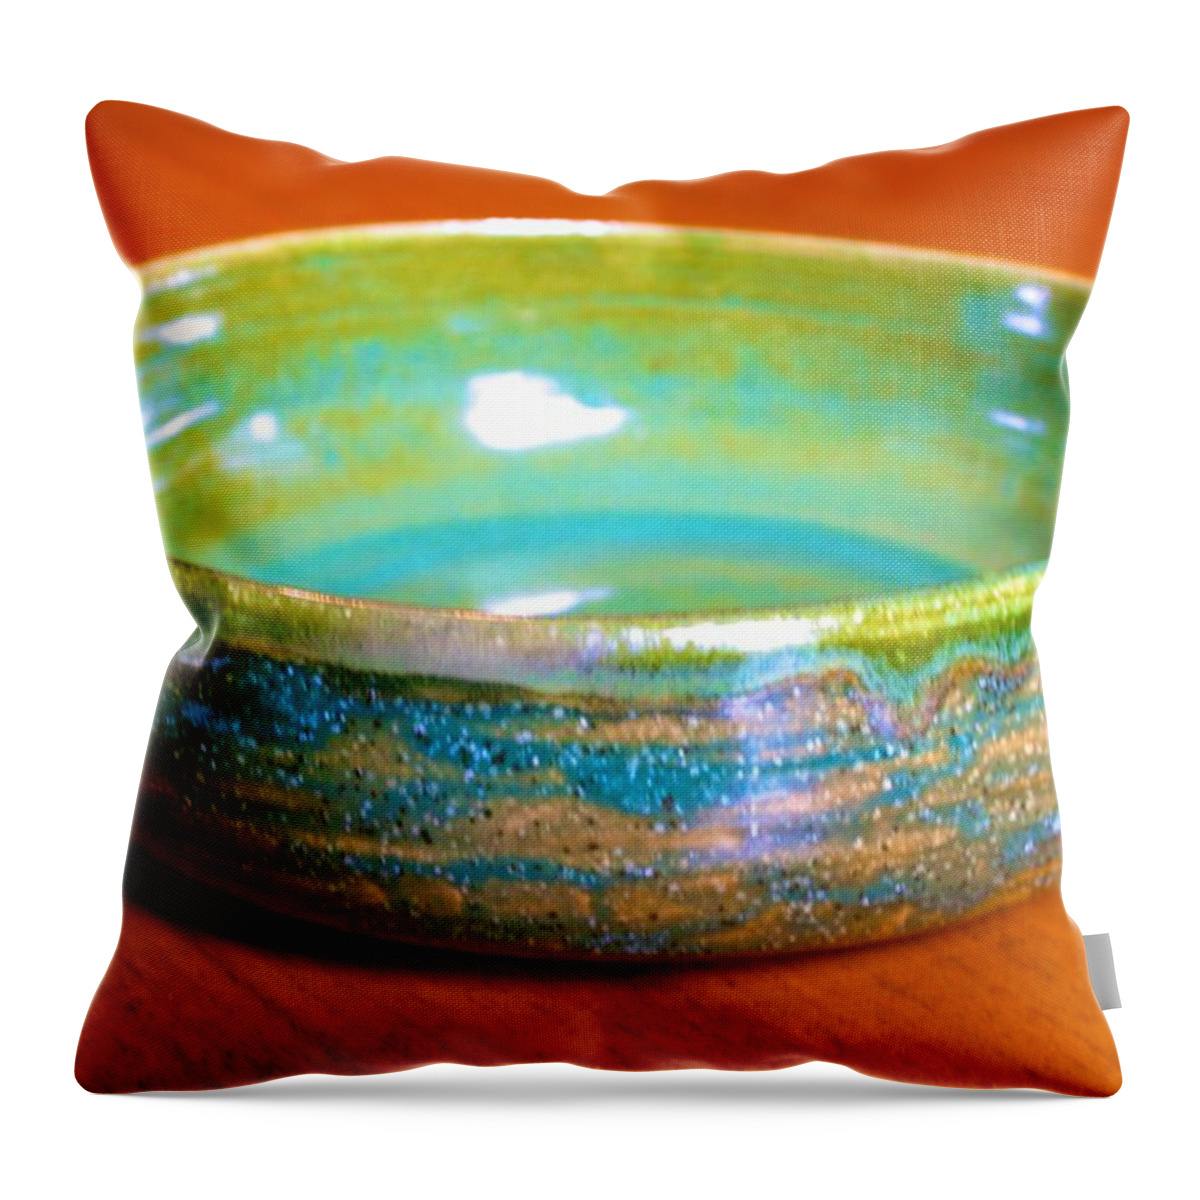  Throw Pillow featuring the ceramic art Bowl with Green Variegated Glaze by Polly Castor